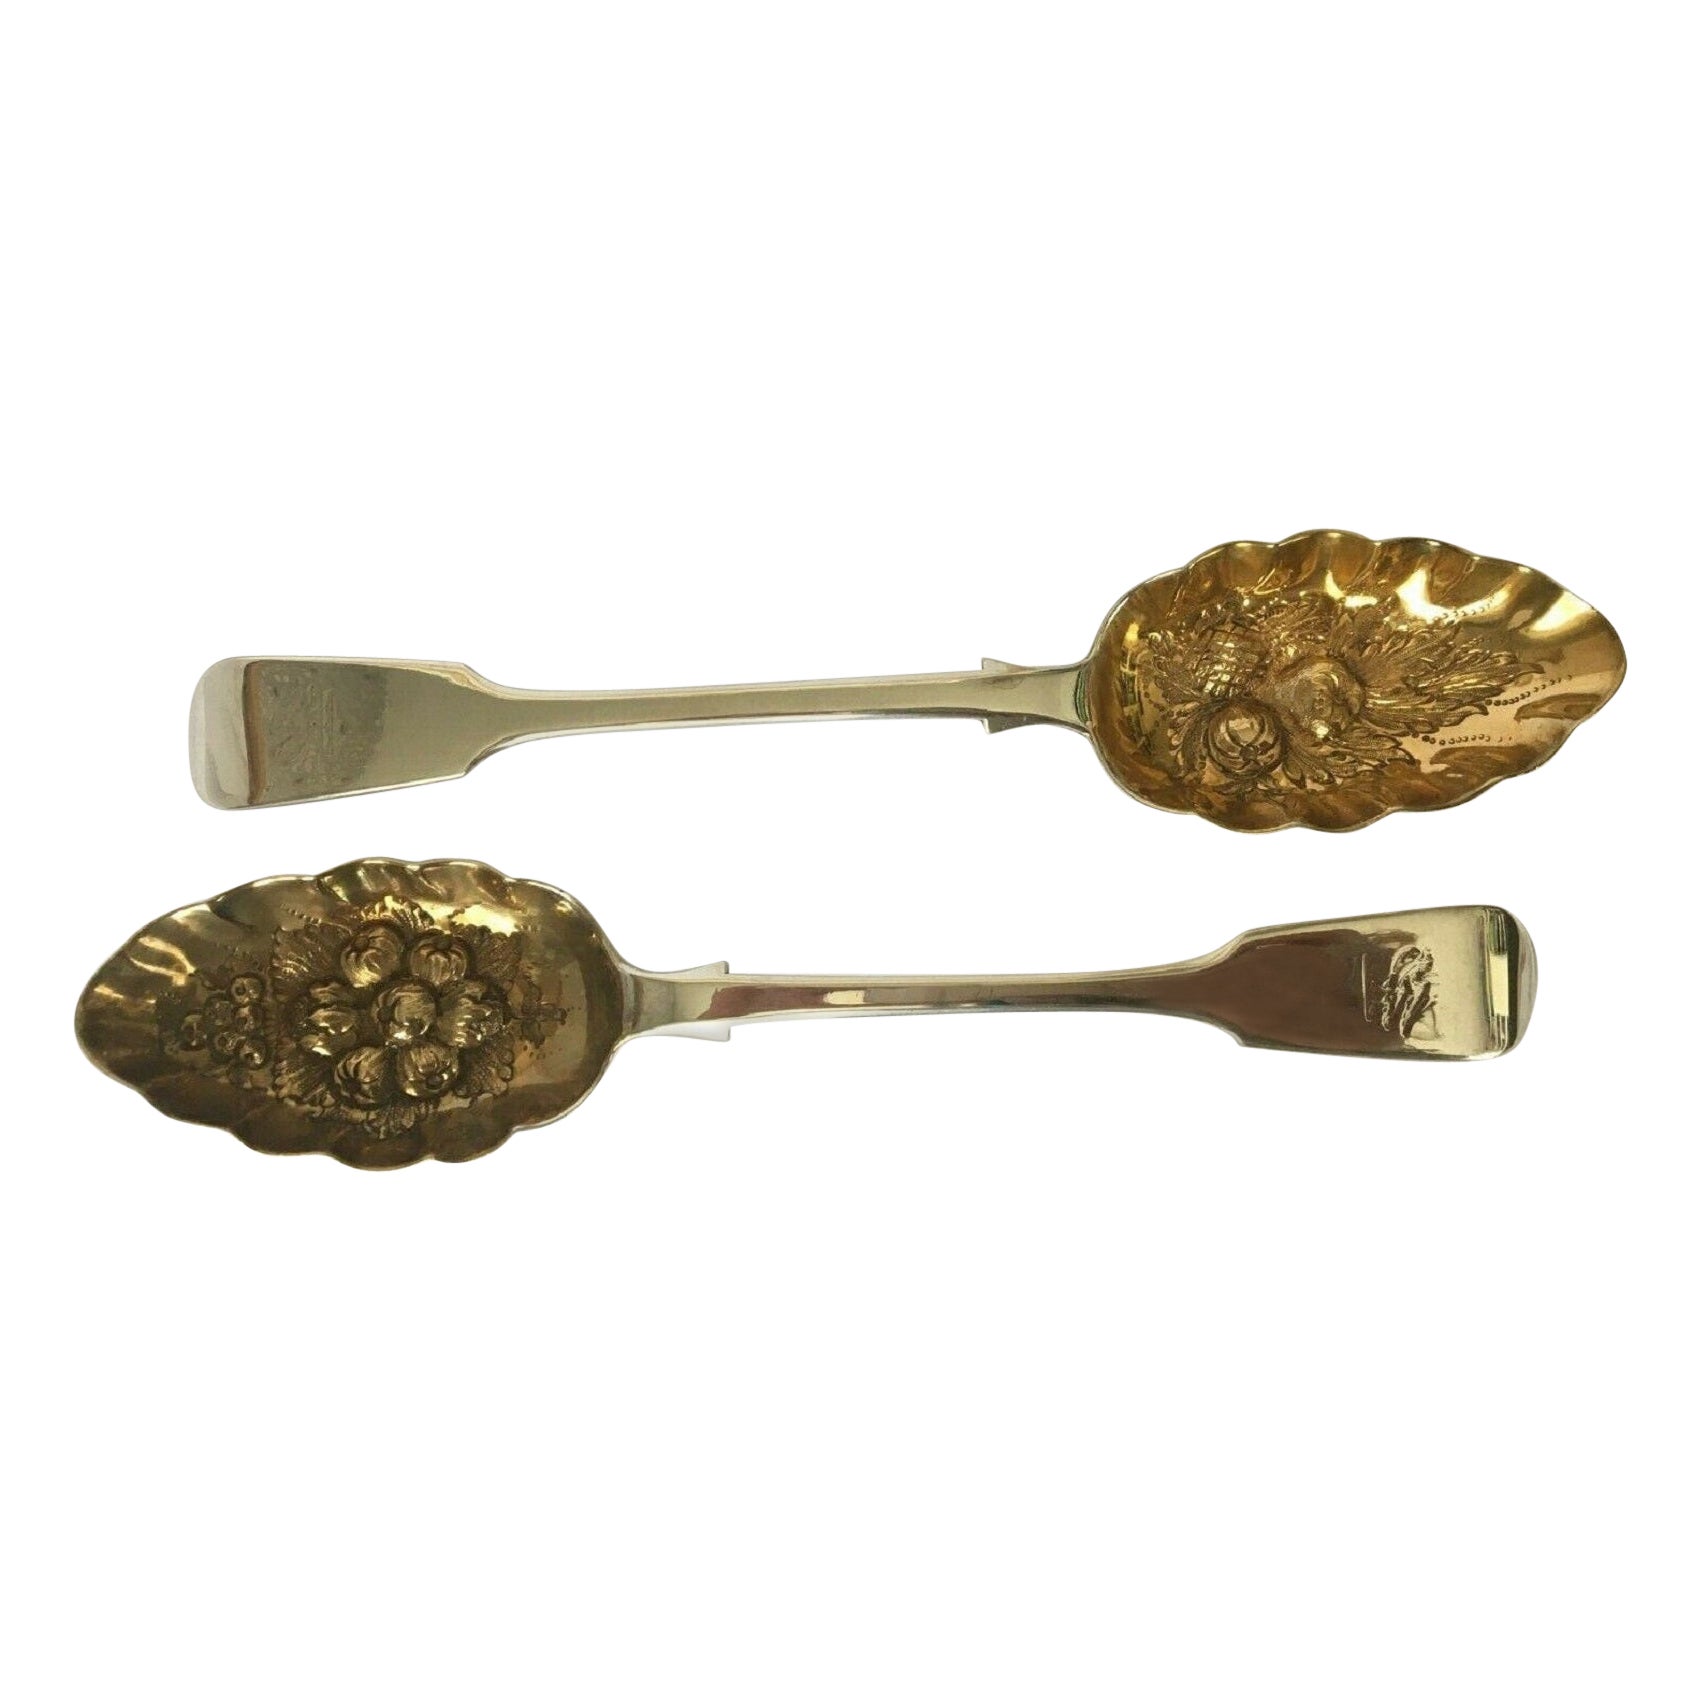 Pair of Victorian Sterling Silver Berry Fruit Serving Spoons, 1848